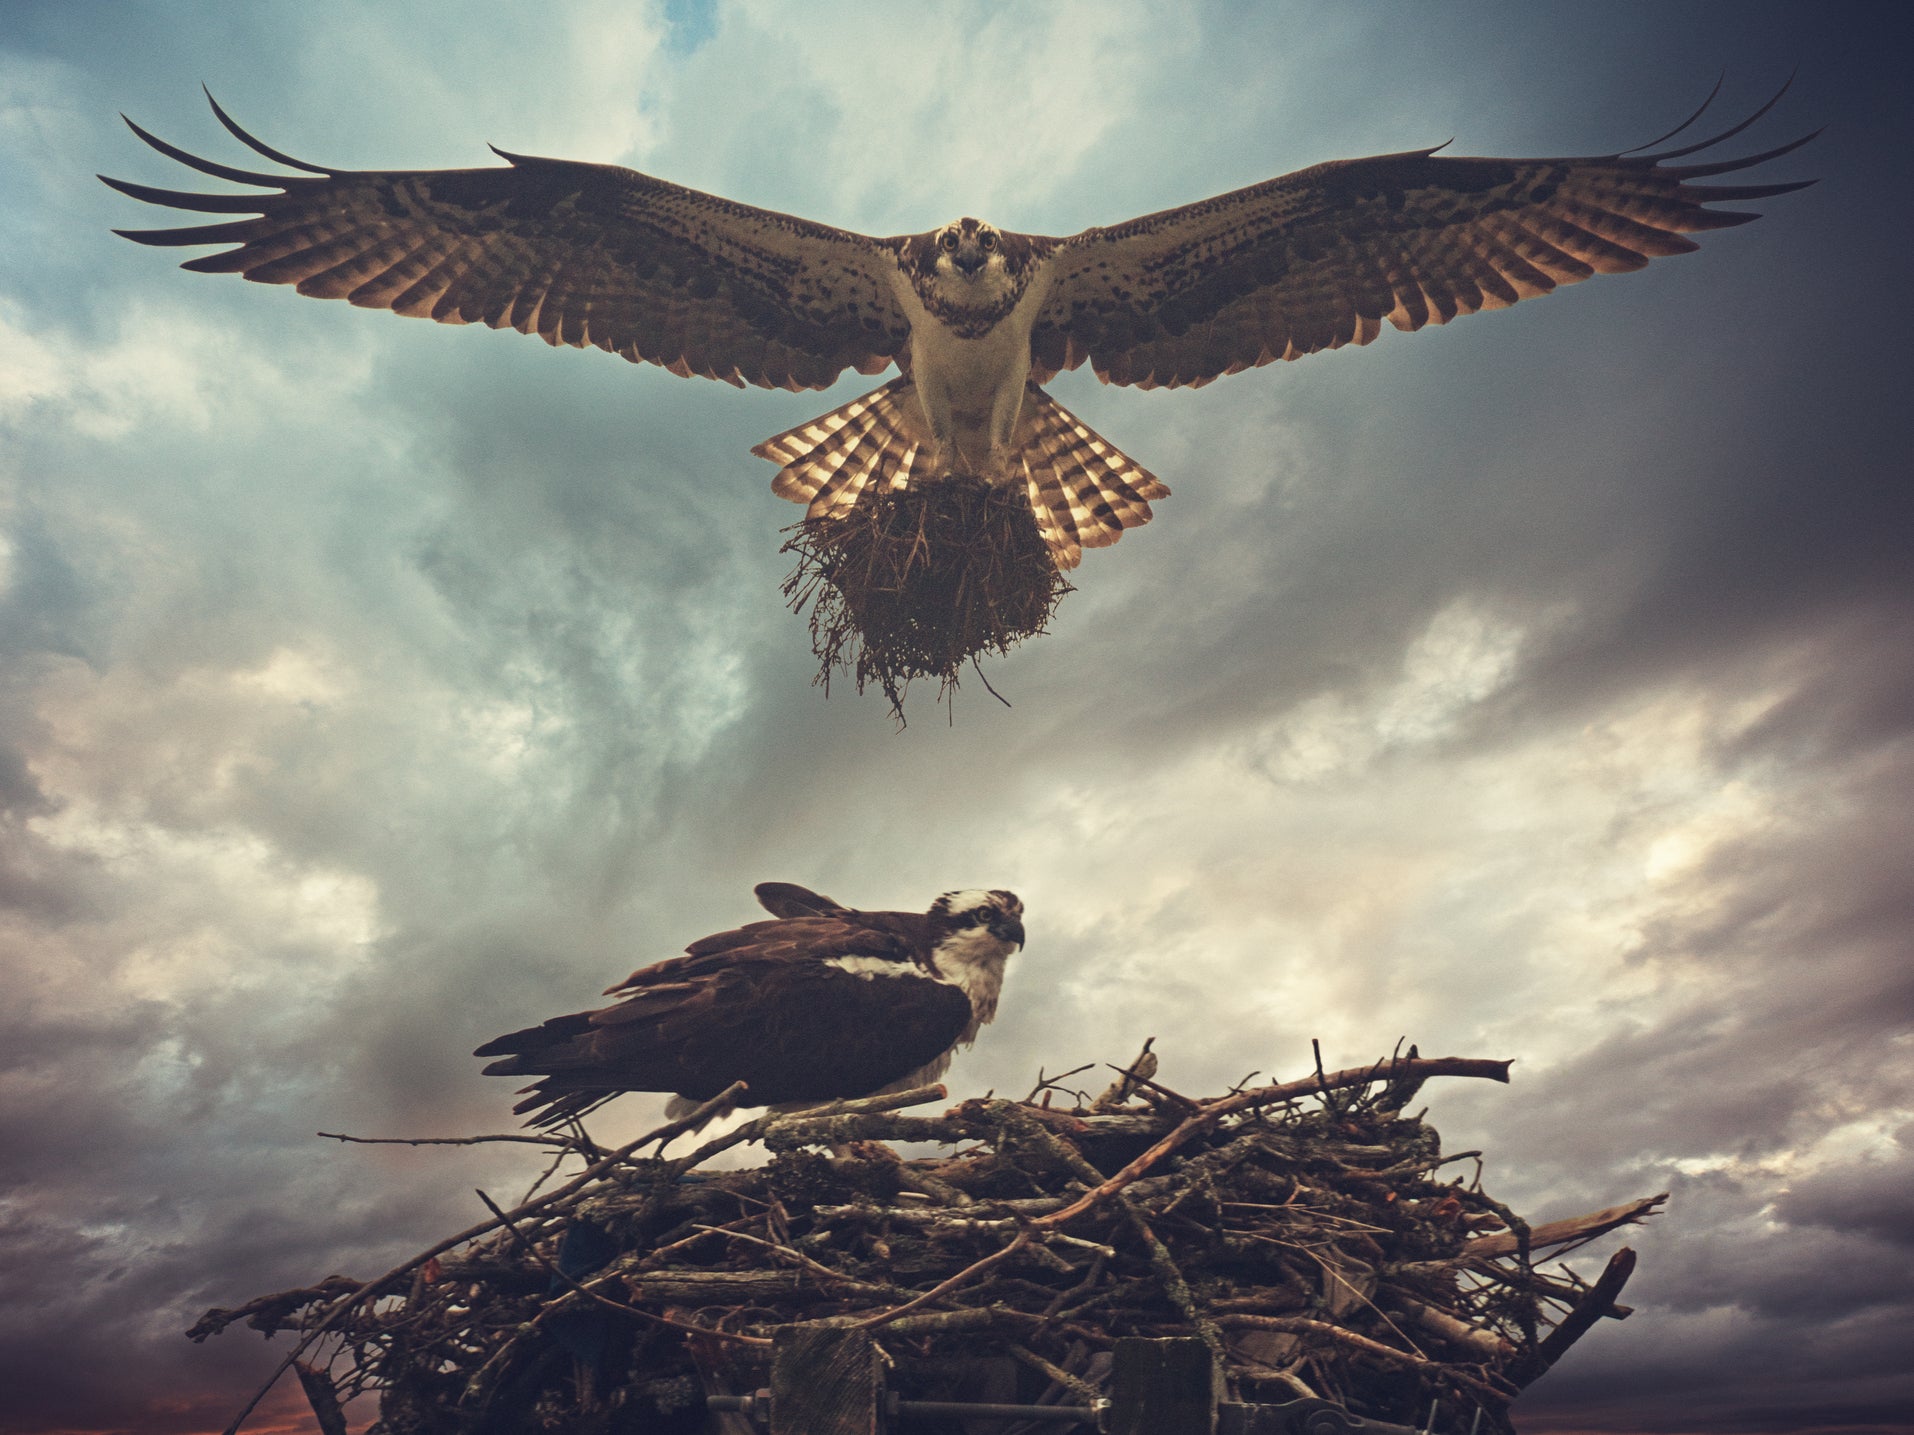 Ospreys nest in the UK during summer months and usually return to the same nesting areas each year